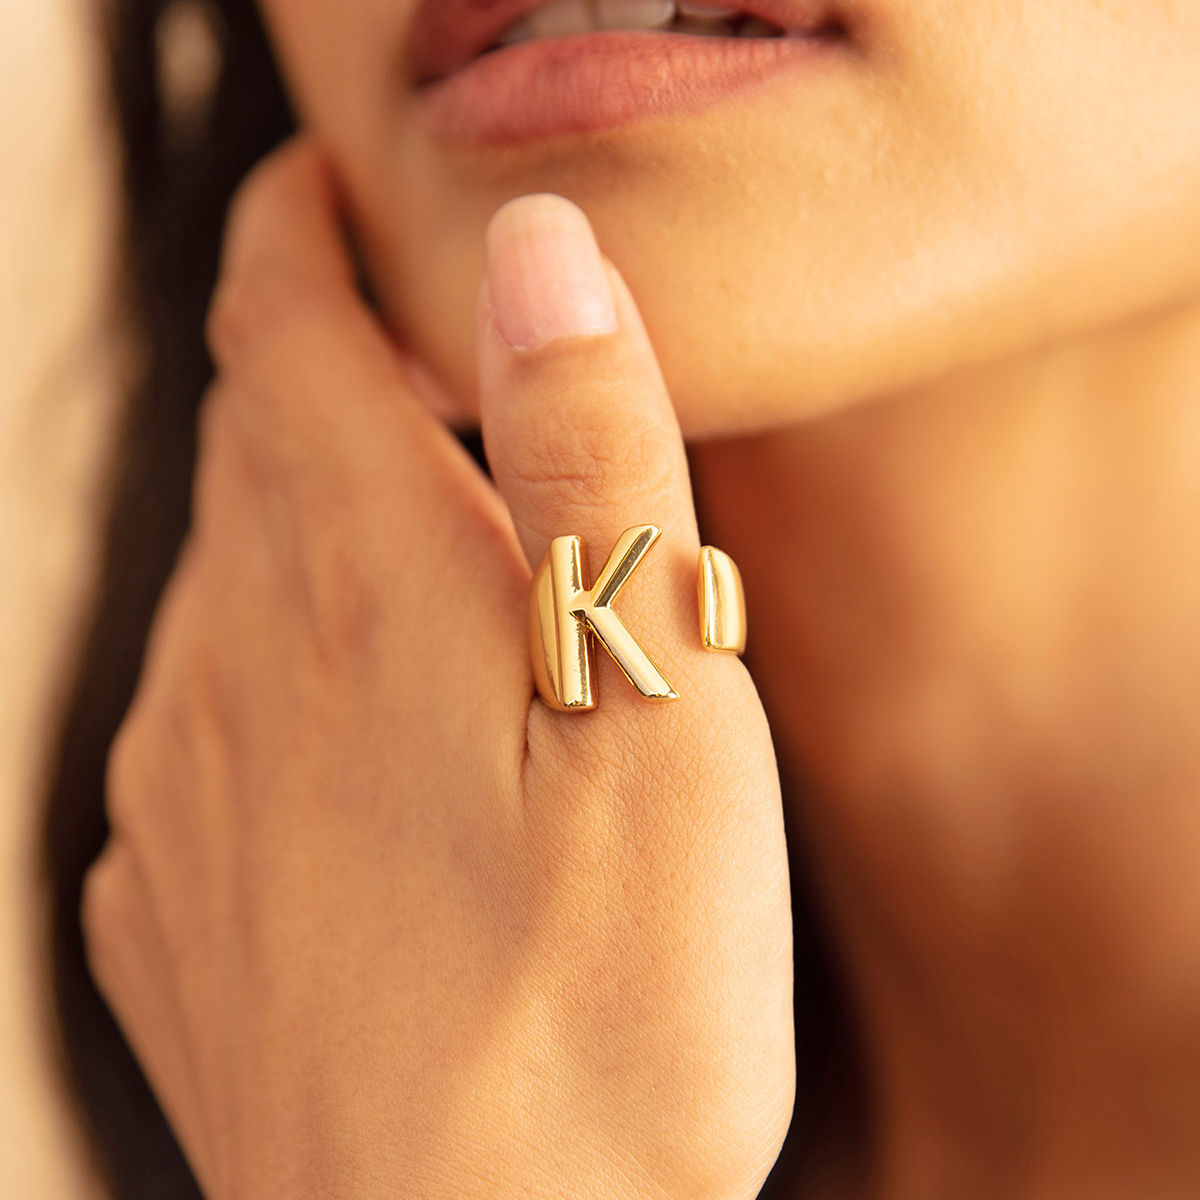 fcity.in - K Letter Rings Gold Adjustable Valentine Latest American Diamond